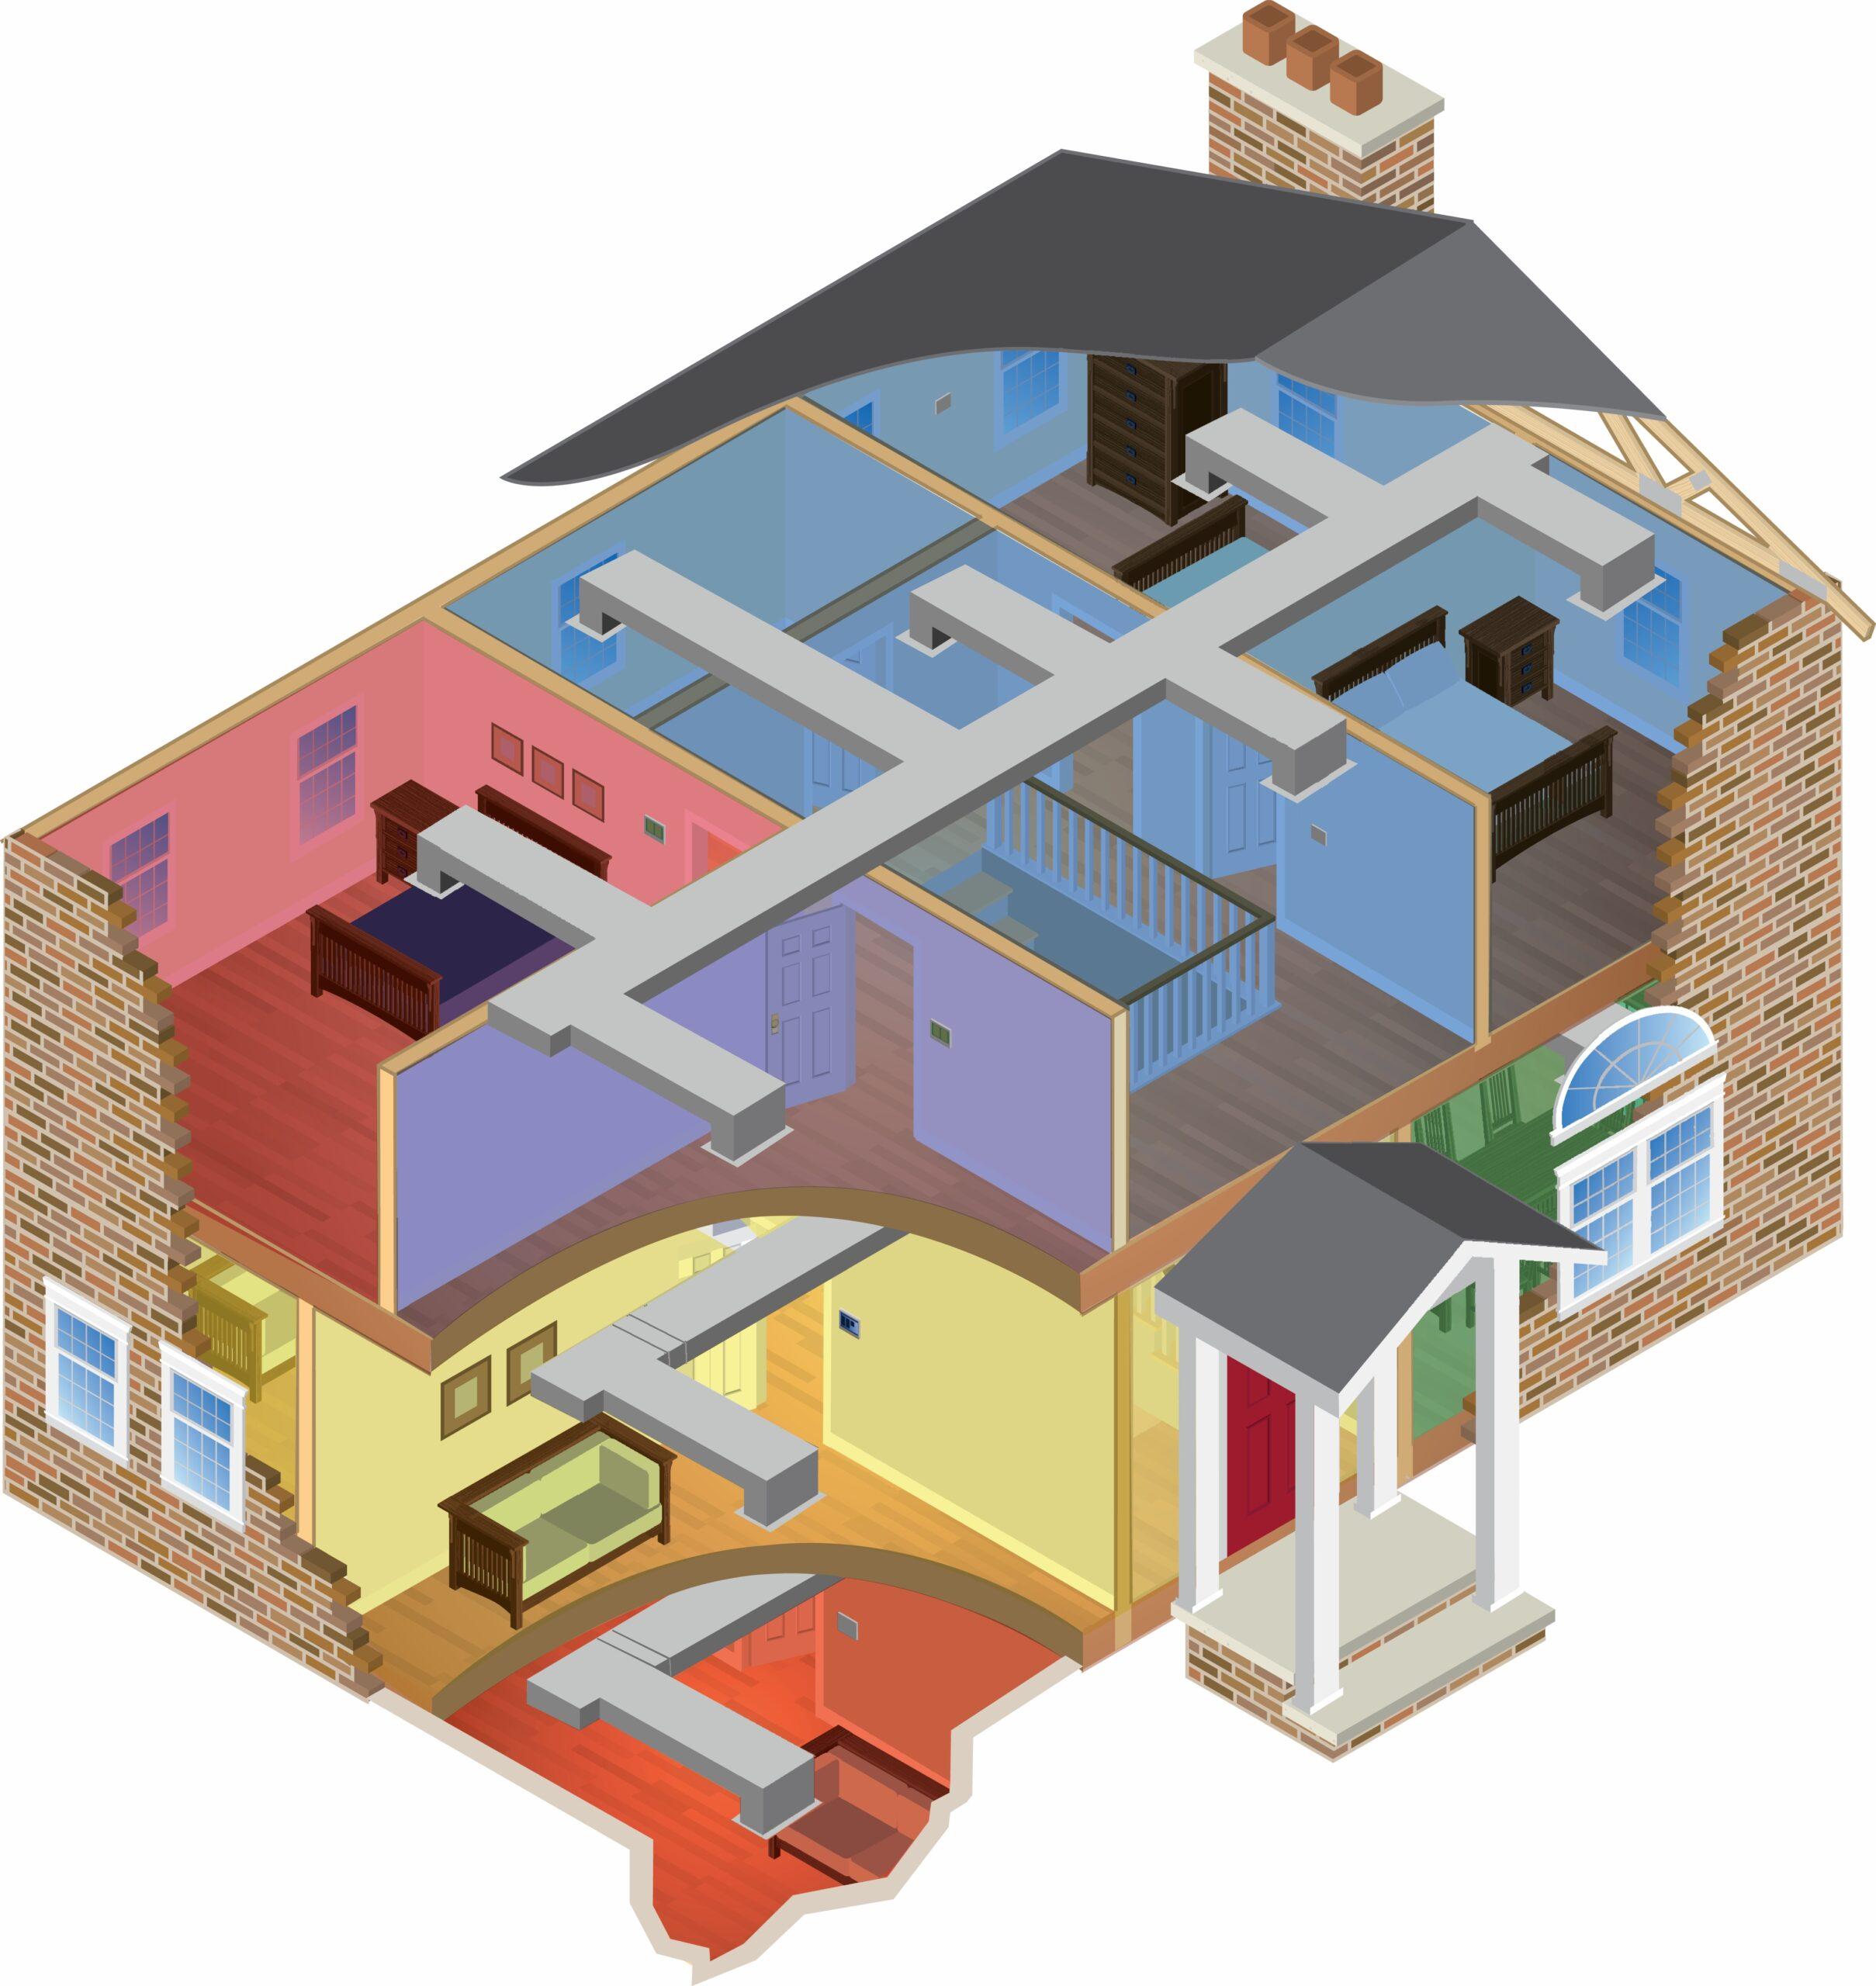 AC Zoning: Is a Zoned HVAC System Right for My Home?